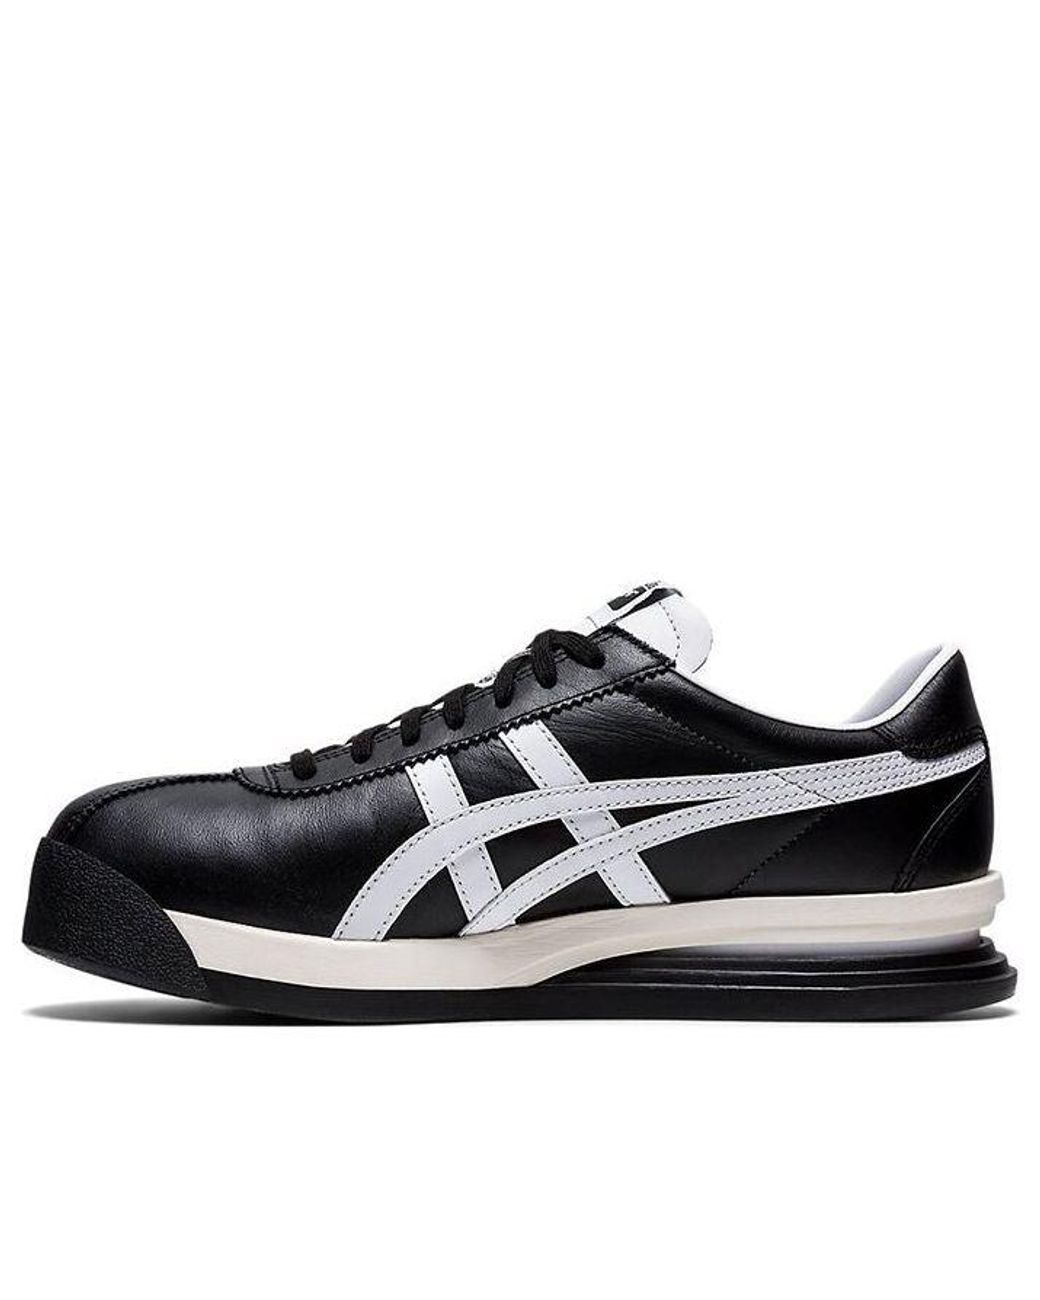 Onitsuka Tiger GSM: The Perfect Blend of Style and Comfort - YouTube